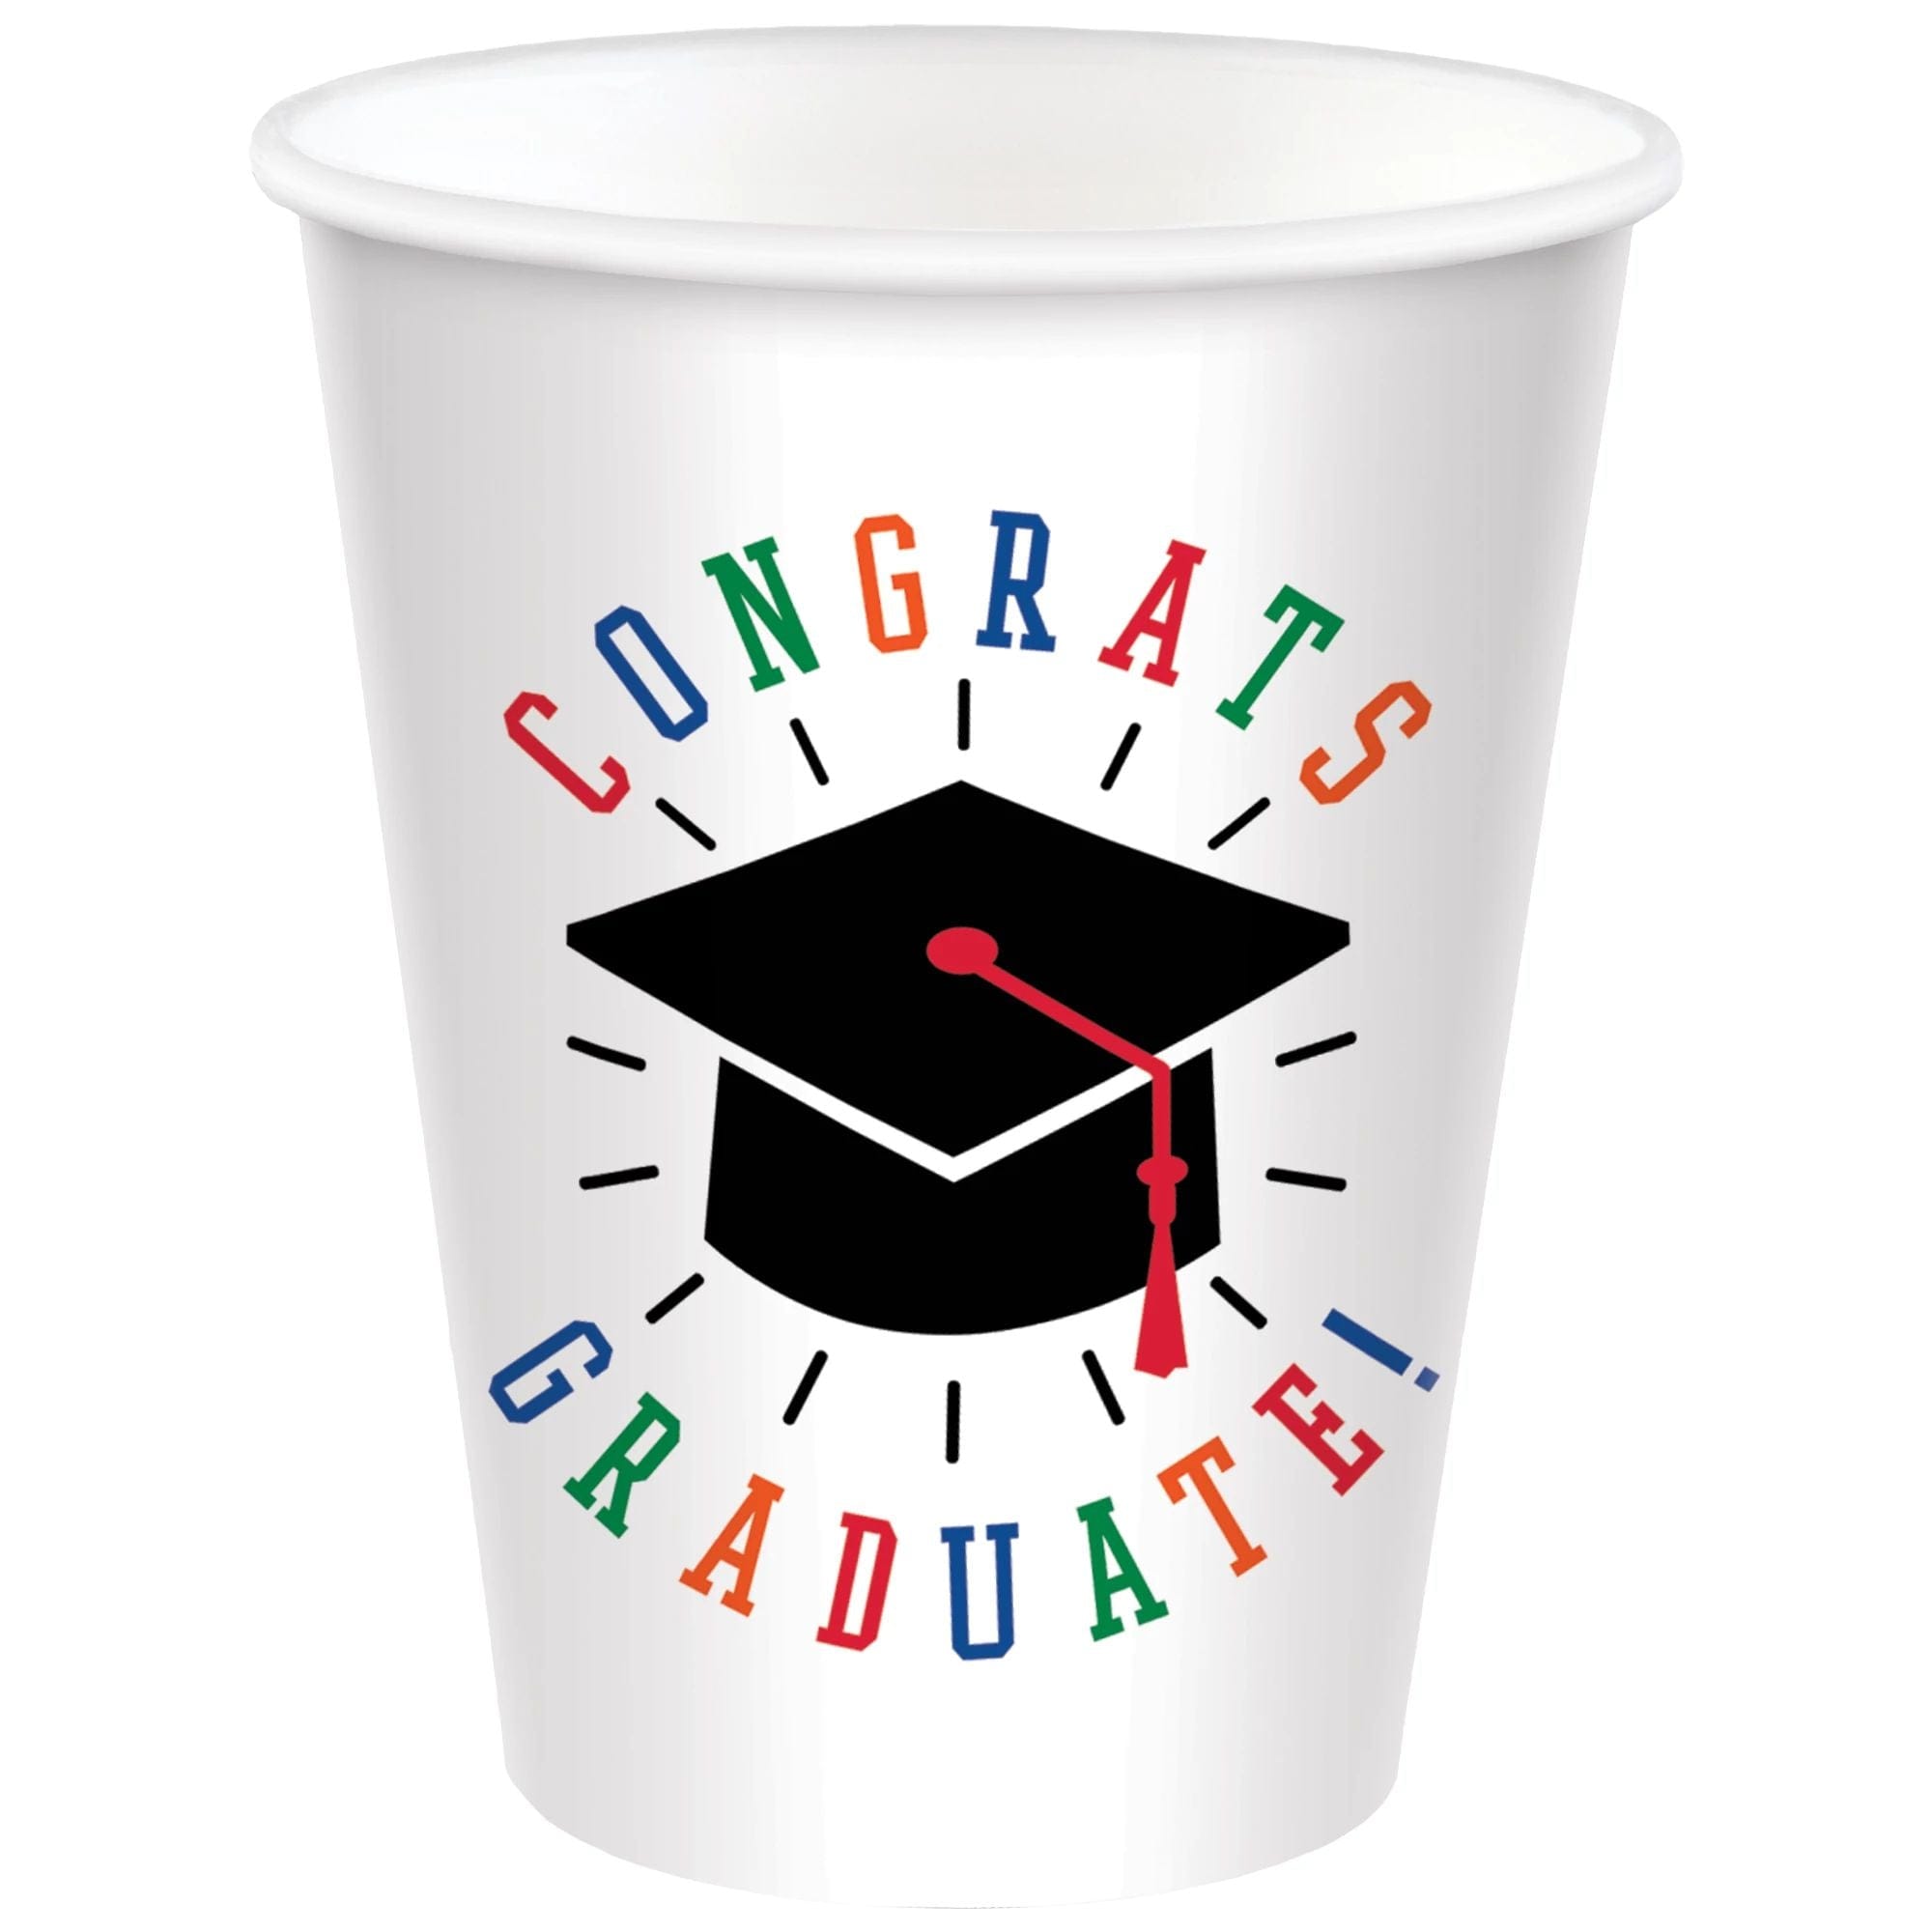 9 oz. Graduated Cups - Case of 500